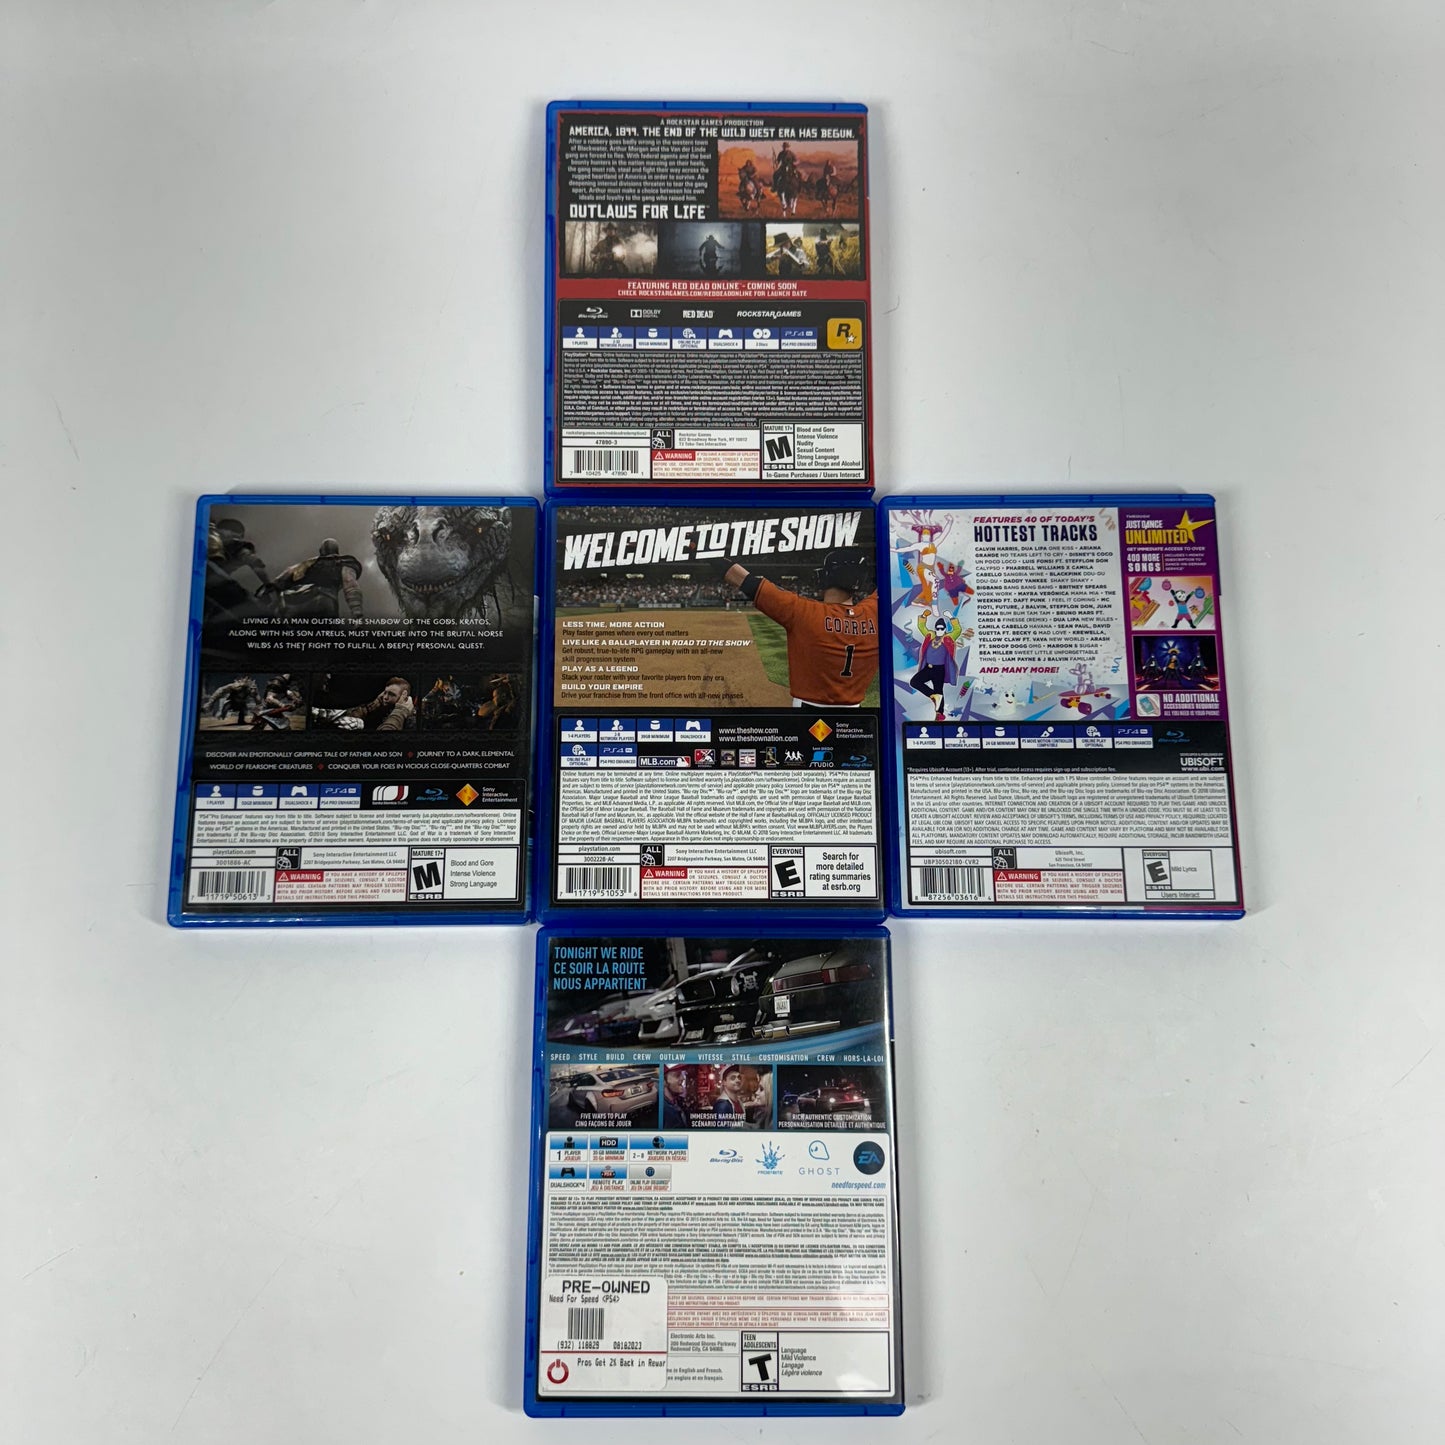 Lot of 5 Sony PlayStation 4 PS4 Games (See description for titles)